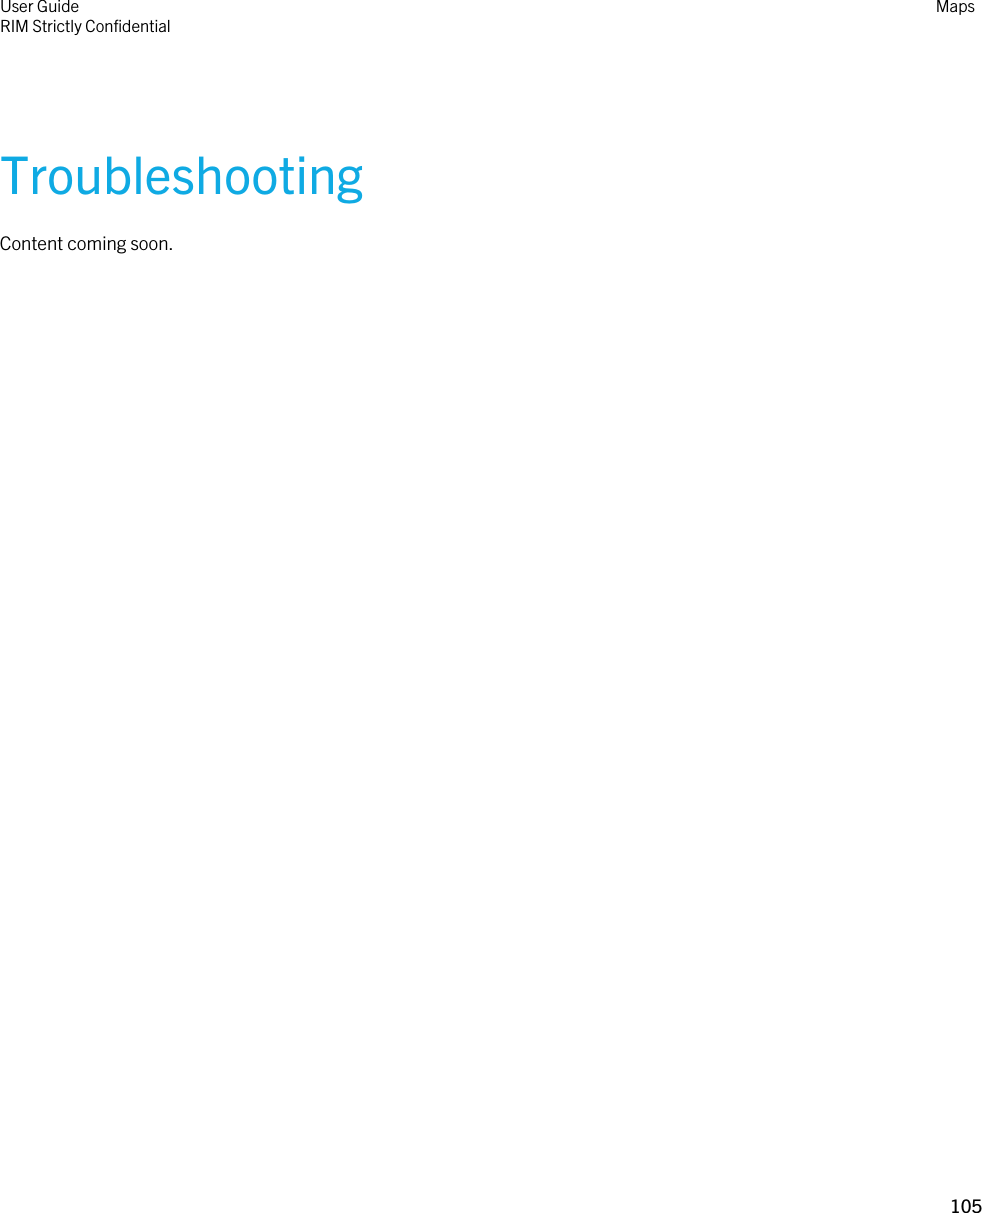 TroubleshootingContent coming soon.User GuideRIM Strictly ConfidentialMaps105 